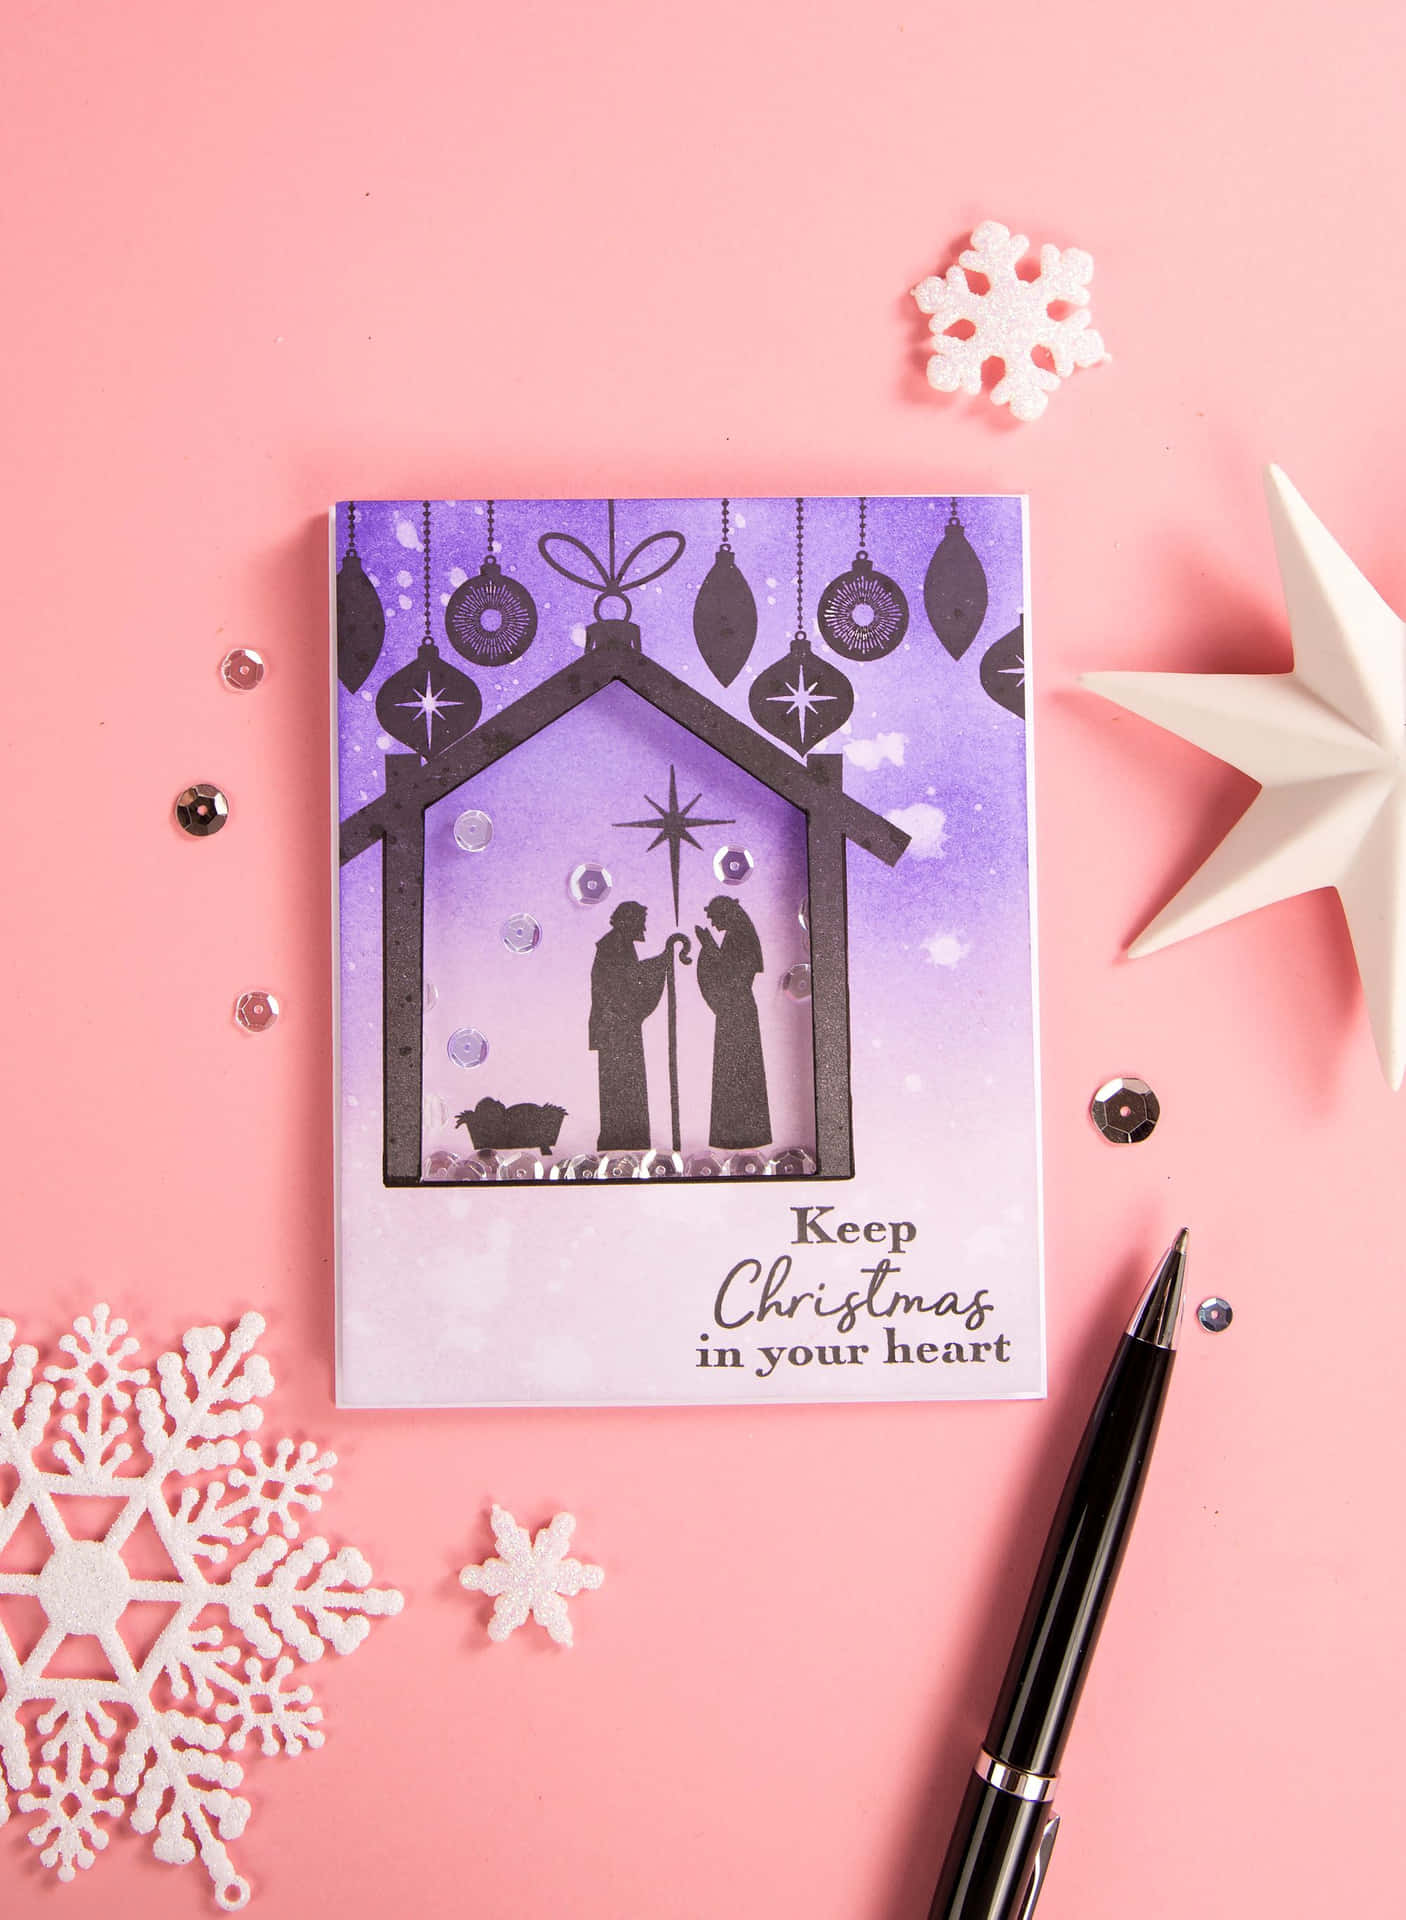 A Christmas Card With A Nativity Scene And A Pen